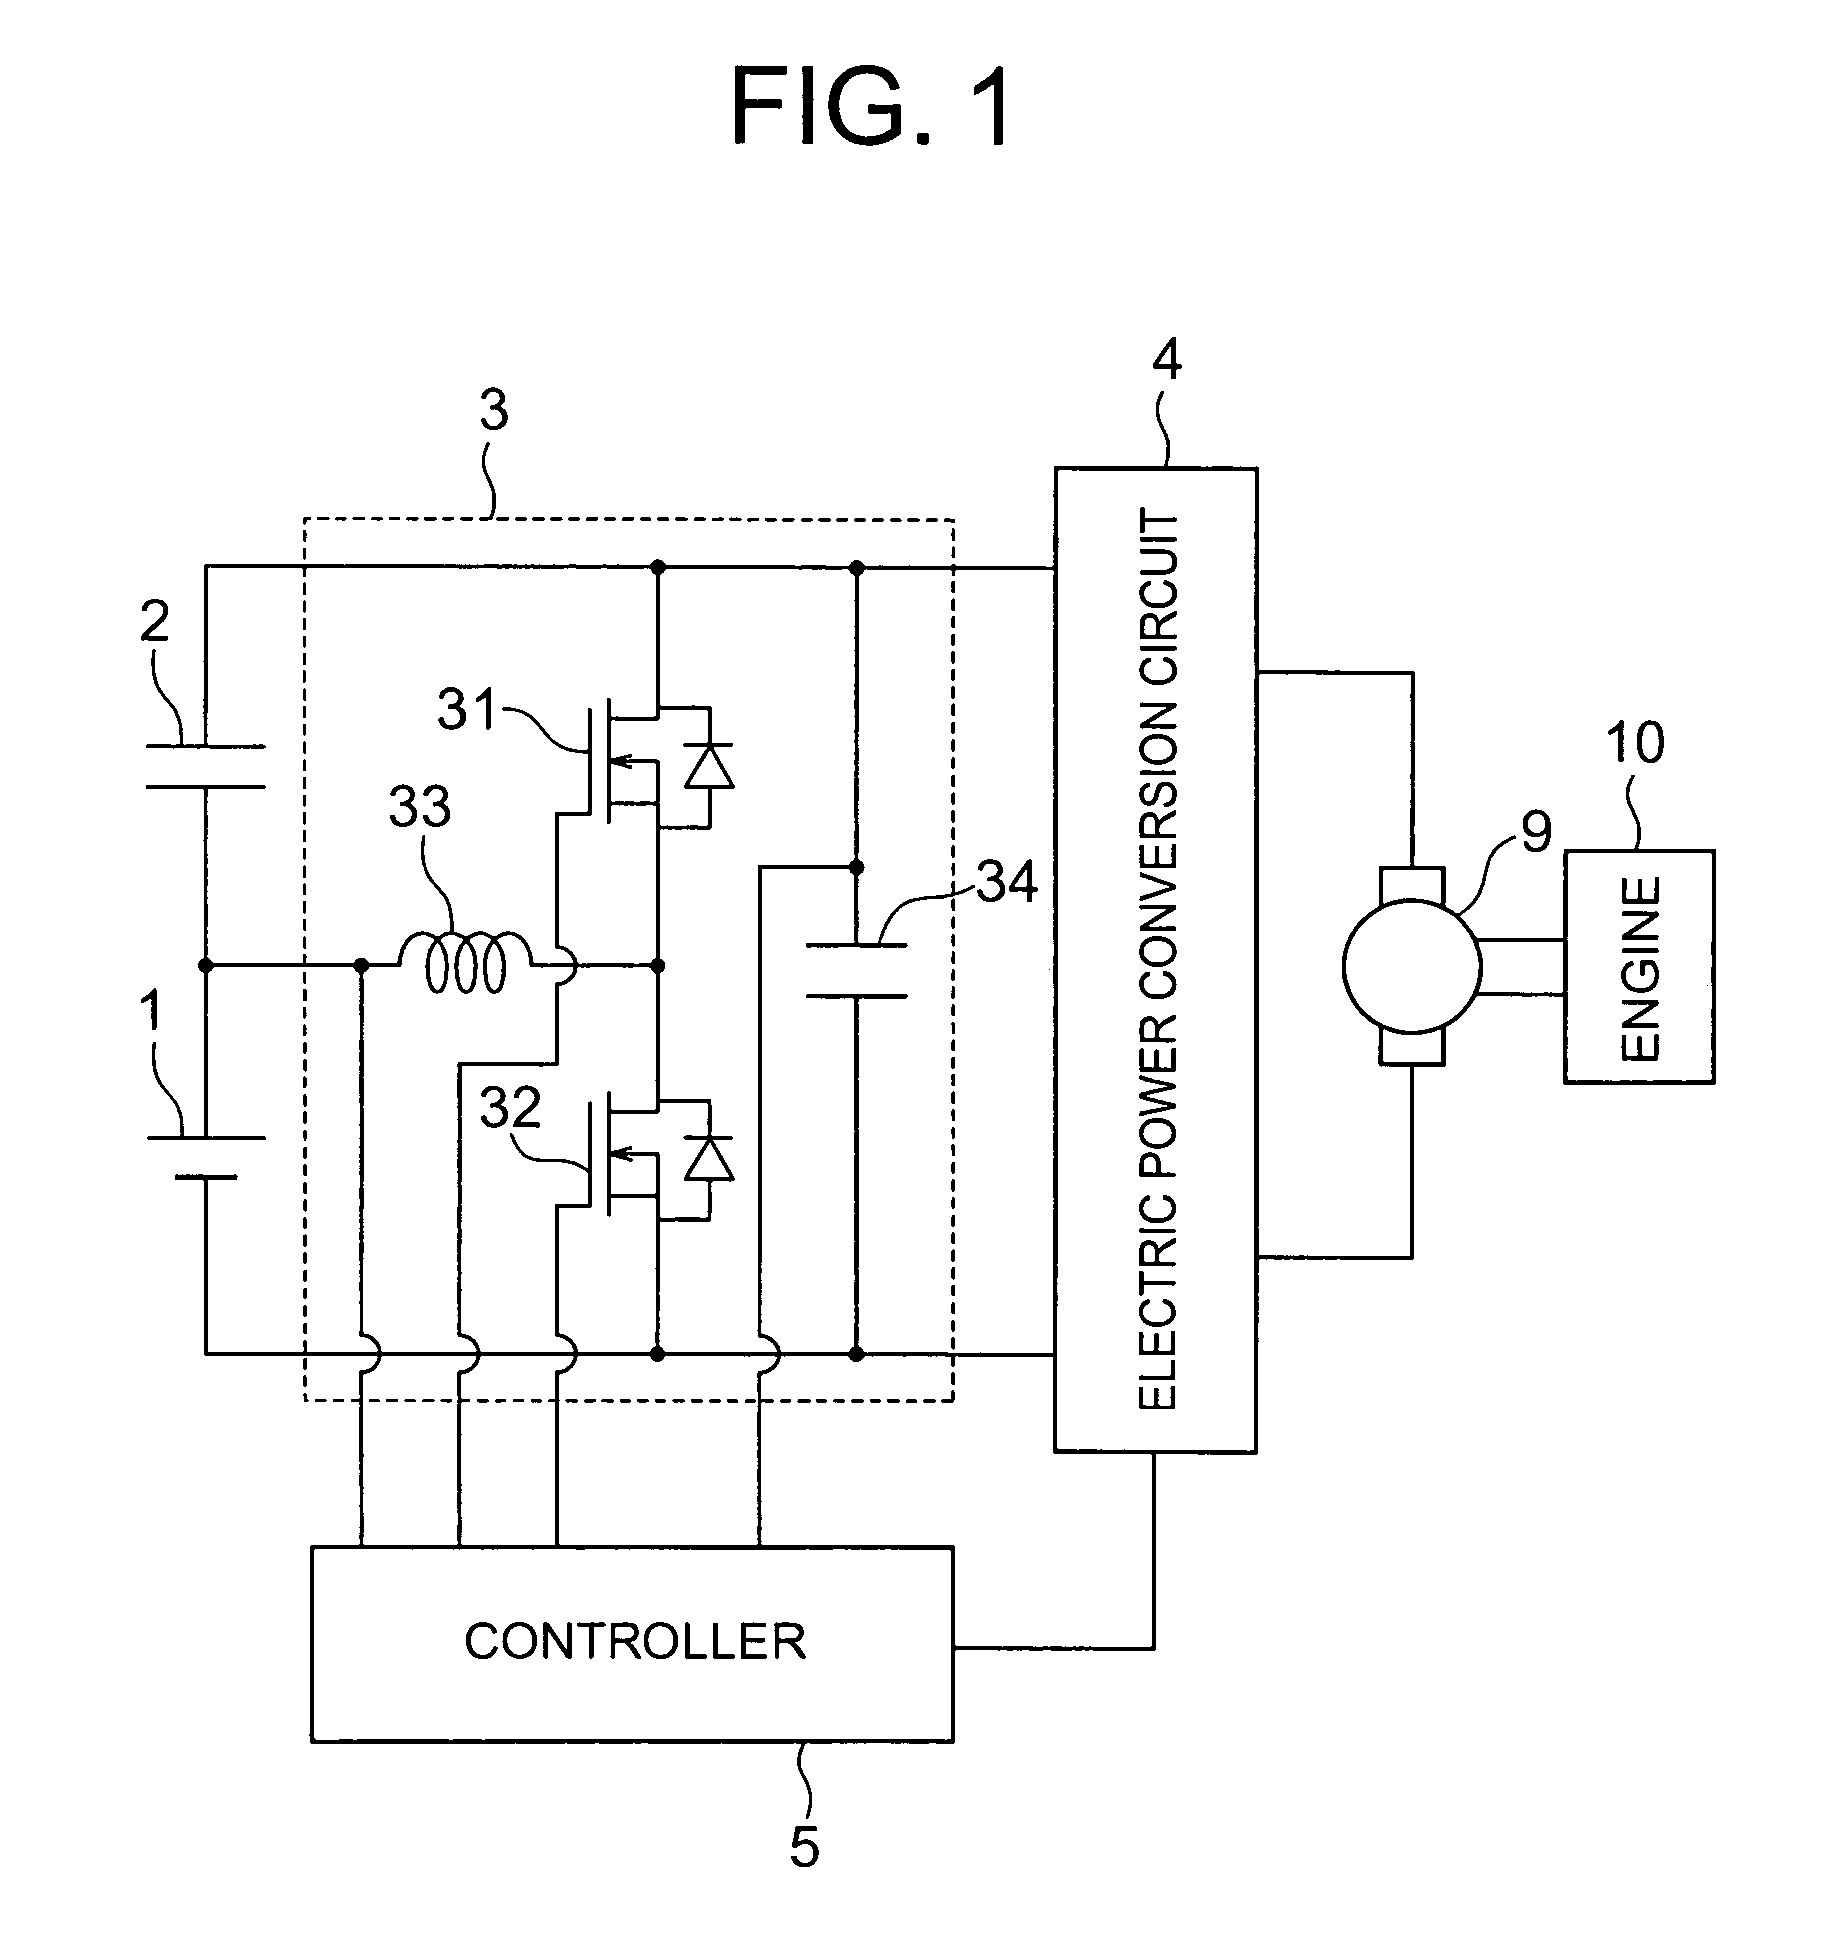 Power circuit for battery